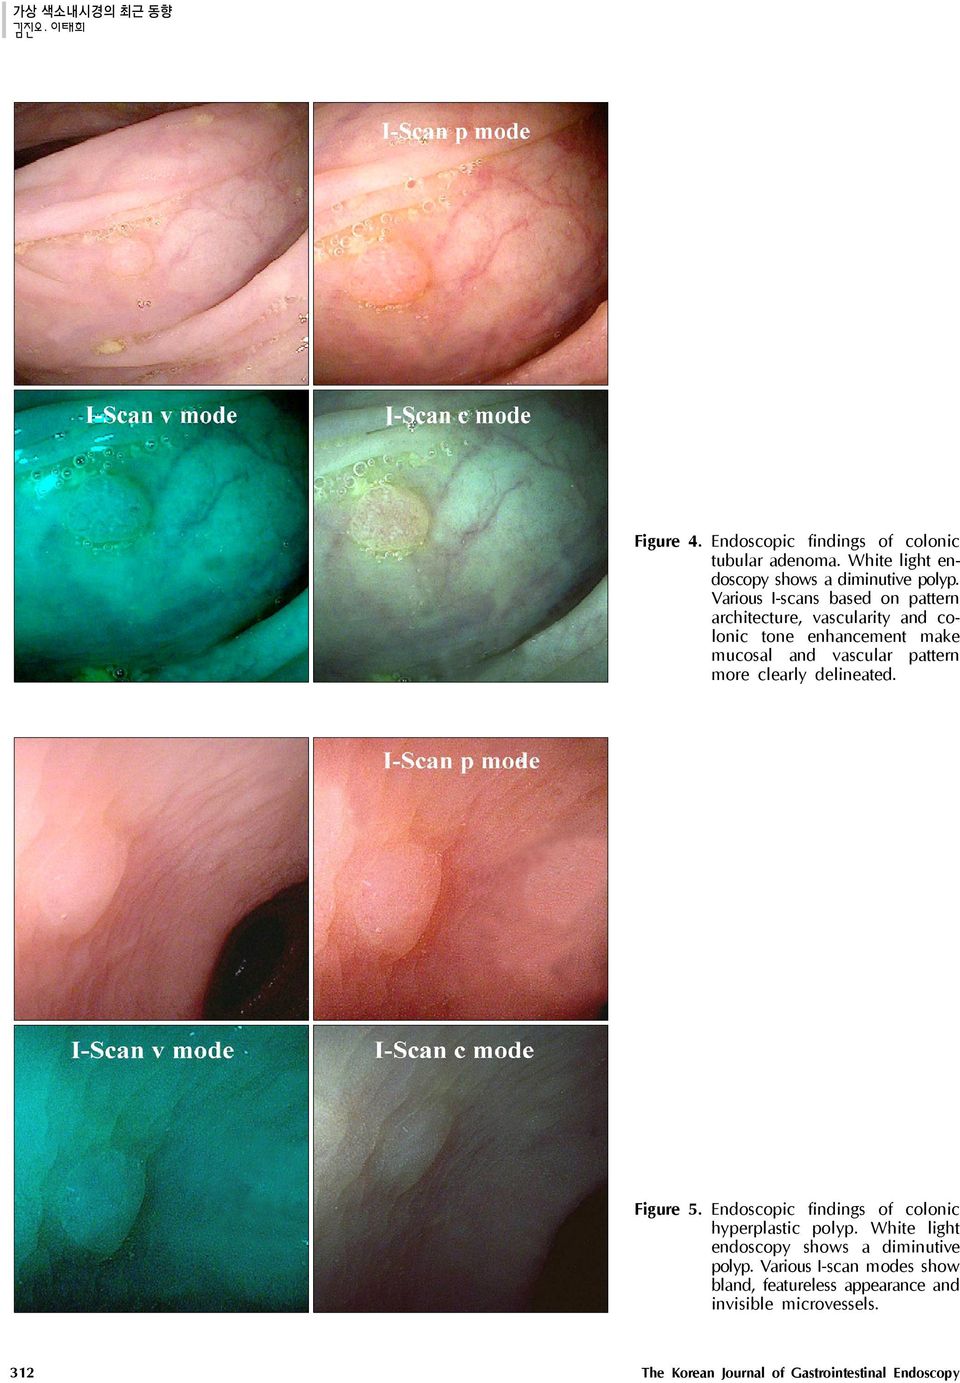 more clearly delineated. Figure 5. Endoscopic findings of colonic hyperplastic polyp.